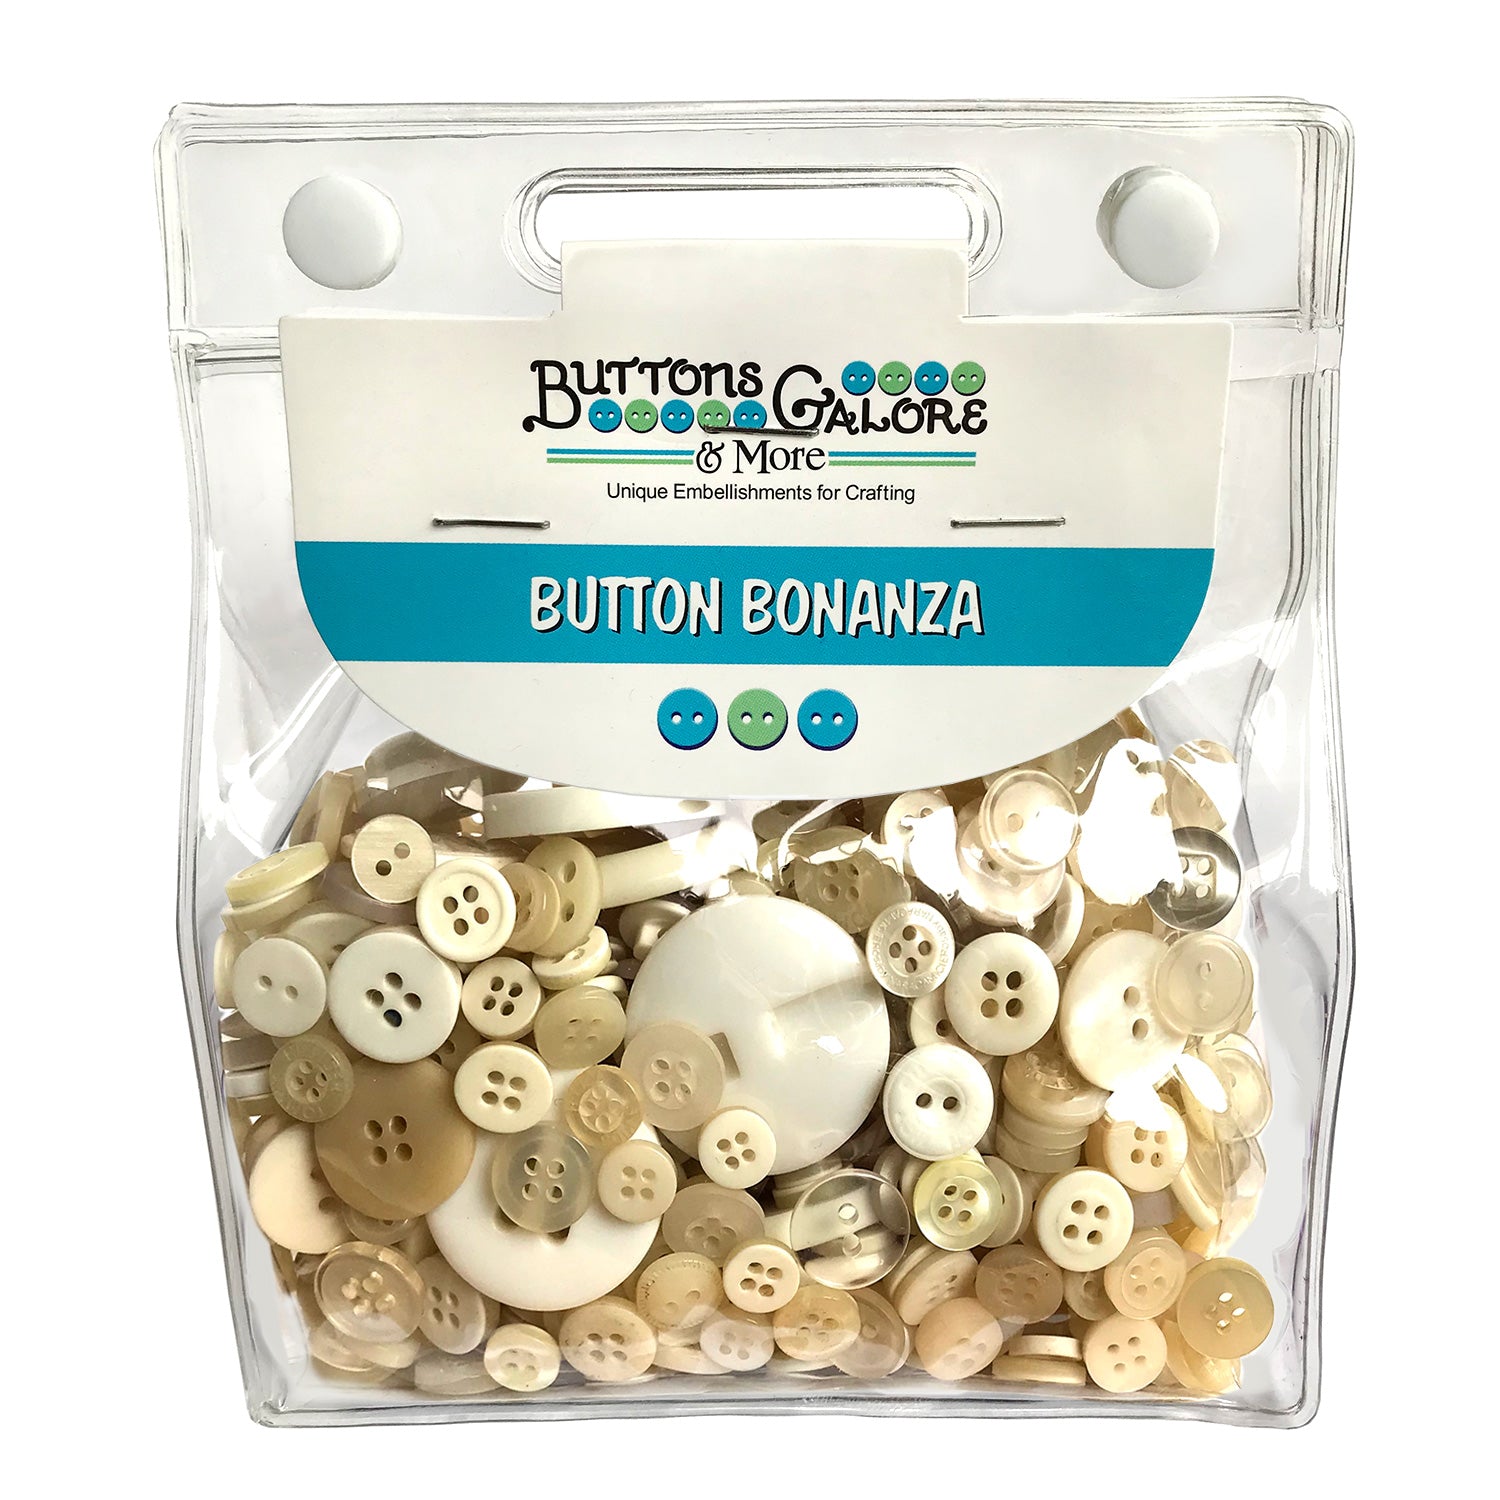 Buttons Galore Flatback Embellishments for Crafts - Swamp & Sea - 18 Pieces